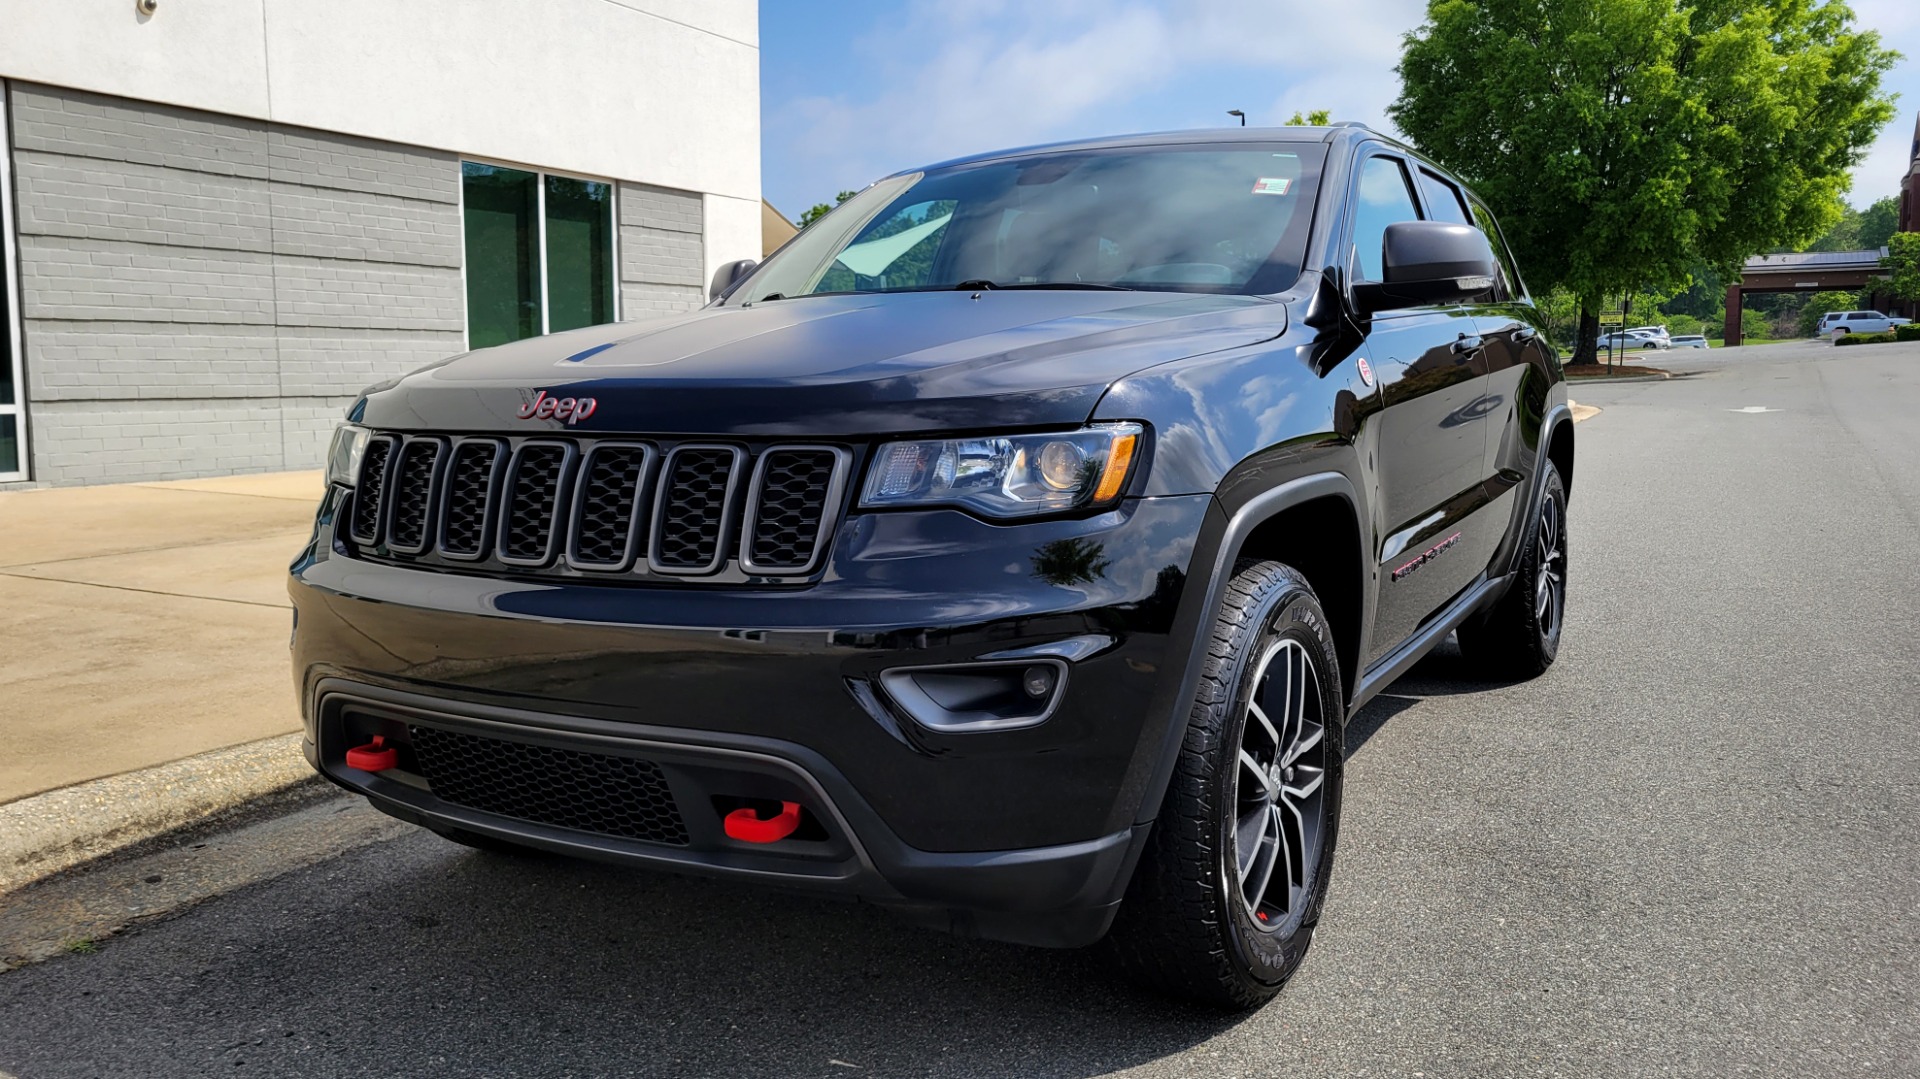 Used 2018 Jeep GRAND CHEROKEE TRAILHAWK 4X4 / 3.6L / NAV / BLIND SPOT / REARVIEW for sale $38,000 at Formula Imports in Charlotte NC 28227 2